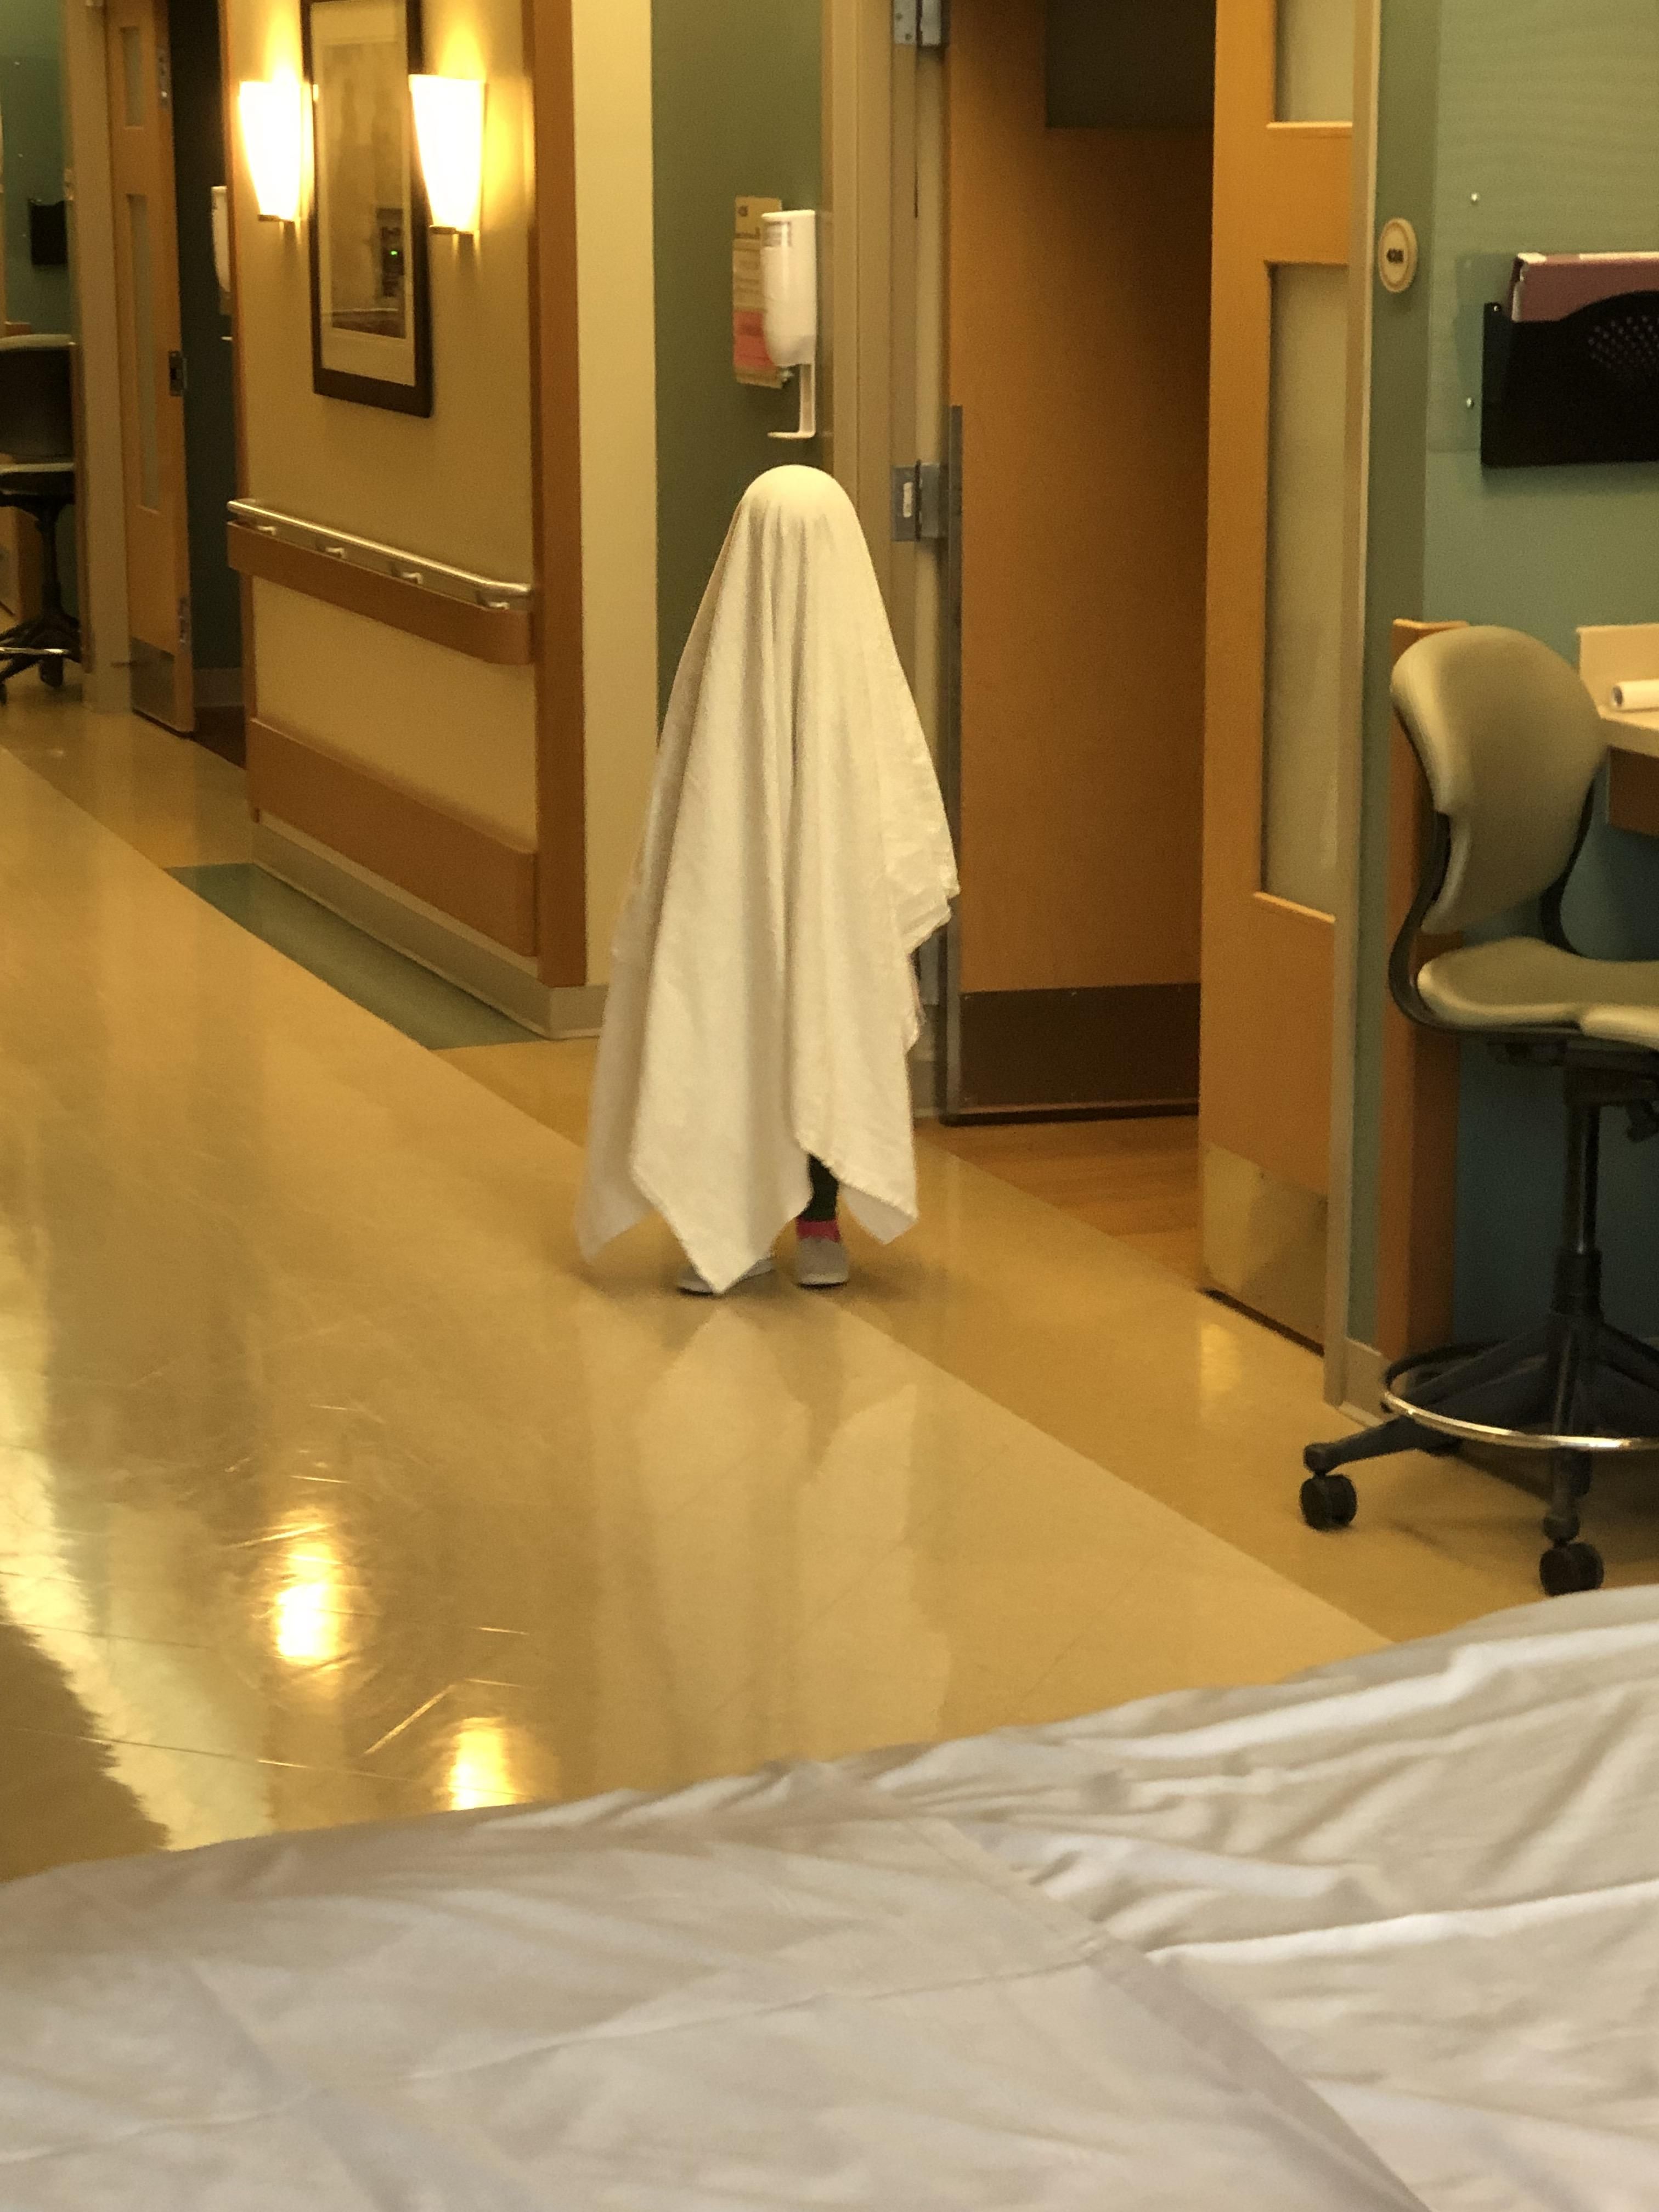 My daughter pretending to be a ghost at the hospital. Probably a poor choice.